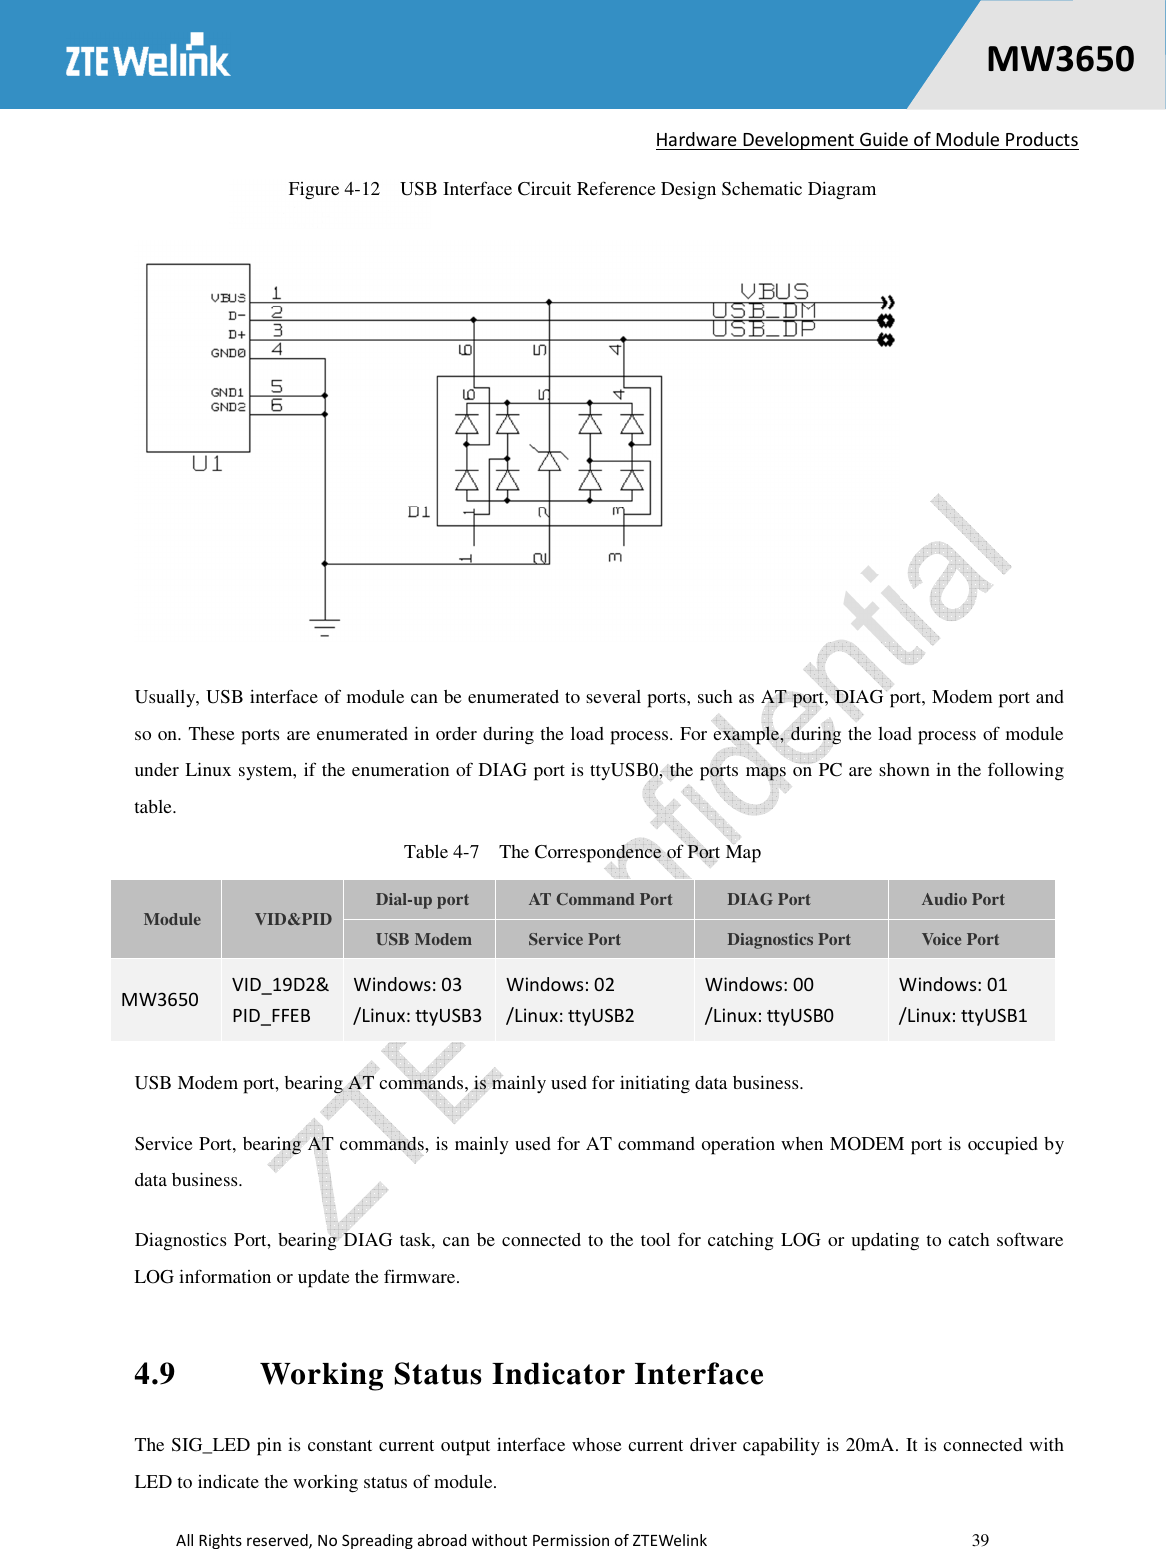   Hardware Development Guide of Module Products  All Rights reserved, No Spreading abroad without Permission of ZTEWelink    39    MW36500 Figure 4-12    USB Interface Circuit Reference Design Schematic Diagram  Usually, USB interface of module can be enumerated to several ports, such as AT port, DIAG port, Modem port and so on. These ports are enumerated in order during the load process. For example, during the load process of module under Linux system, if the enumeration of DIAG port is ttyUSB0, the ports maps on PC are shown in the following table. Table 4-7    The Correspondence of Port Map Module  VID&amp;PID  Dial-up port  AT Command Port  DIAG Port  Audio Port USB Modem  Service Port  Diagnostics Port  Voice Port MW3650  VID_19D2&amp; PID_FFEB Windows: 03   /Linux: ttyUSB3 Windows: 02 /Linux: ttyUSB2 Windows: 00   /Linux: ttyUSB0 Windows: 01   /Linux: ttyUSB1 USB Modem port, bearing AT commands, is mainly used for initiating data business. Service Port, bearing AT commands, is mainly used for AT command operation when MODEM port is occupied by data business. Diagnostics Port, bearing DIAG task, can be connected to the tool for catching LOG or updating to catch software LOG information or update the firmware. 4.9  Working Status Indicator Interface The SIG_LED pin is constant current output interface whose current driver capability is 20mA. It is connected with LED to indicate the working status of module. 